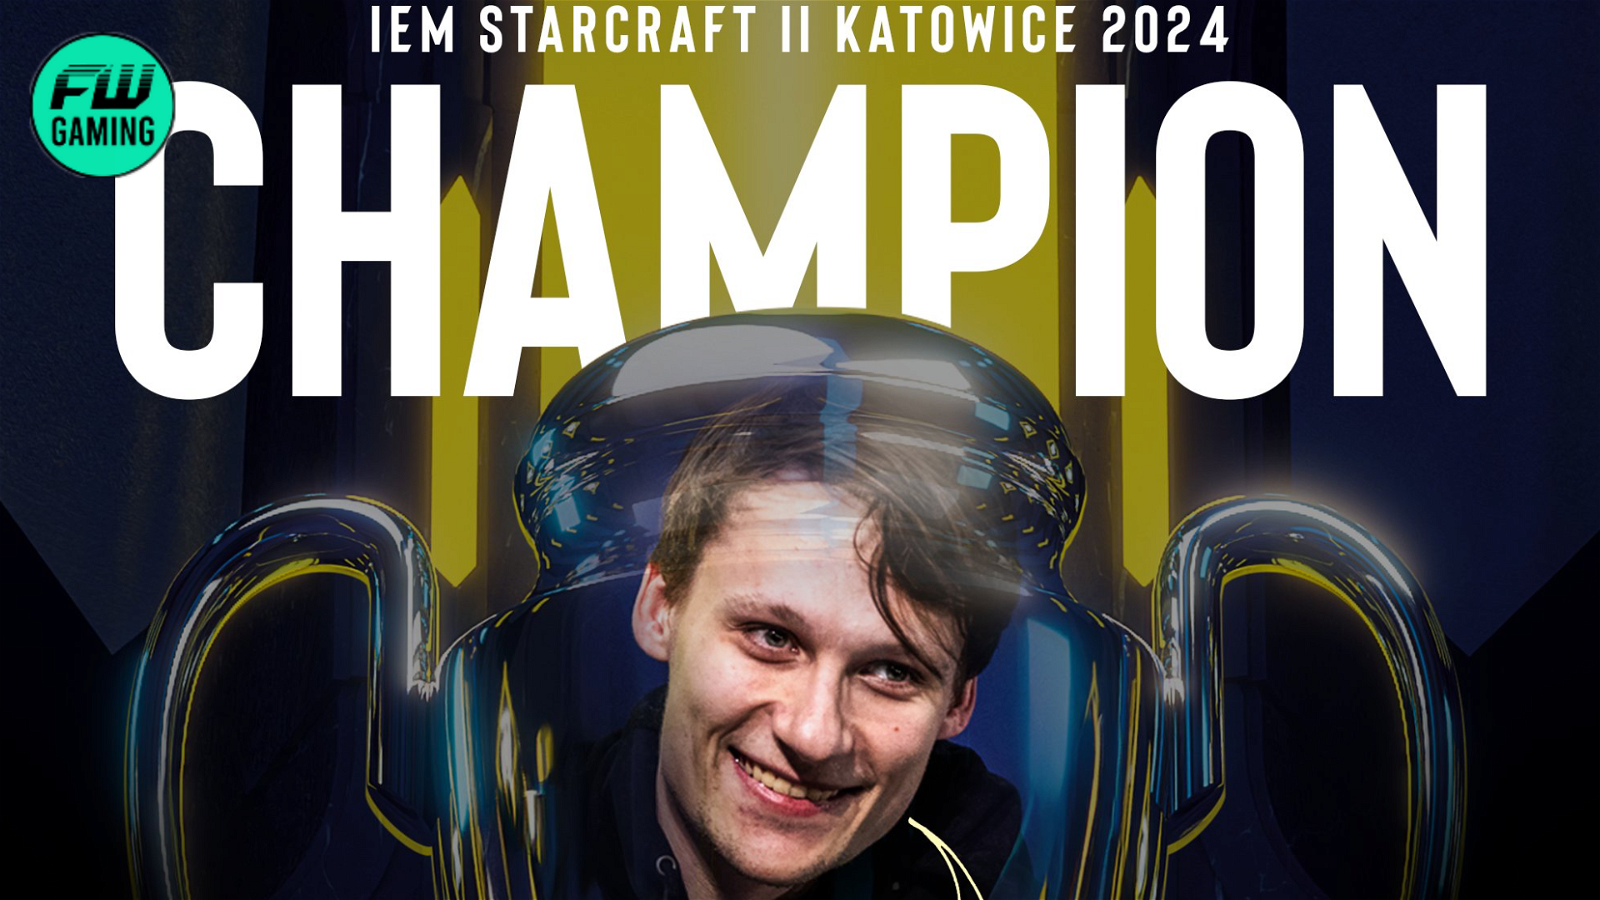 BASILISK's 'Serral' Demolishes 'Maru' in One of the Most One-Sided Starcraft 2 Finals at IEM Katowice 2024